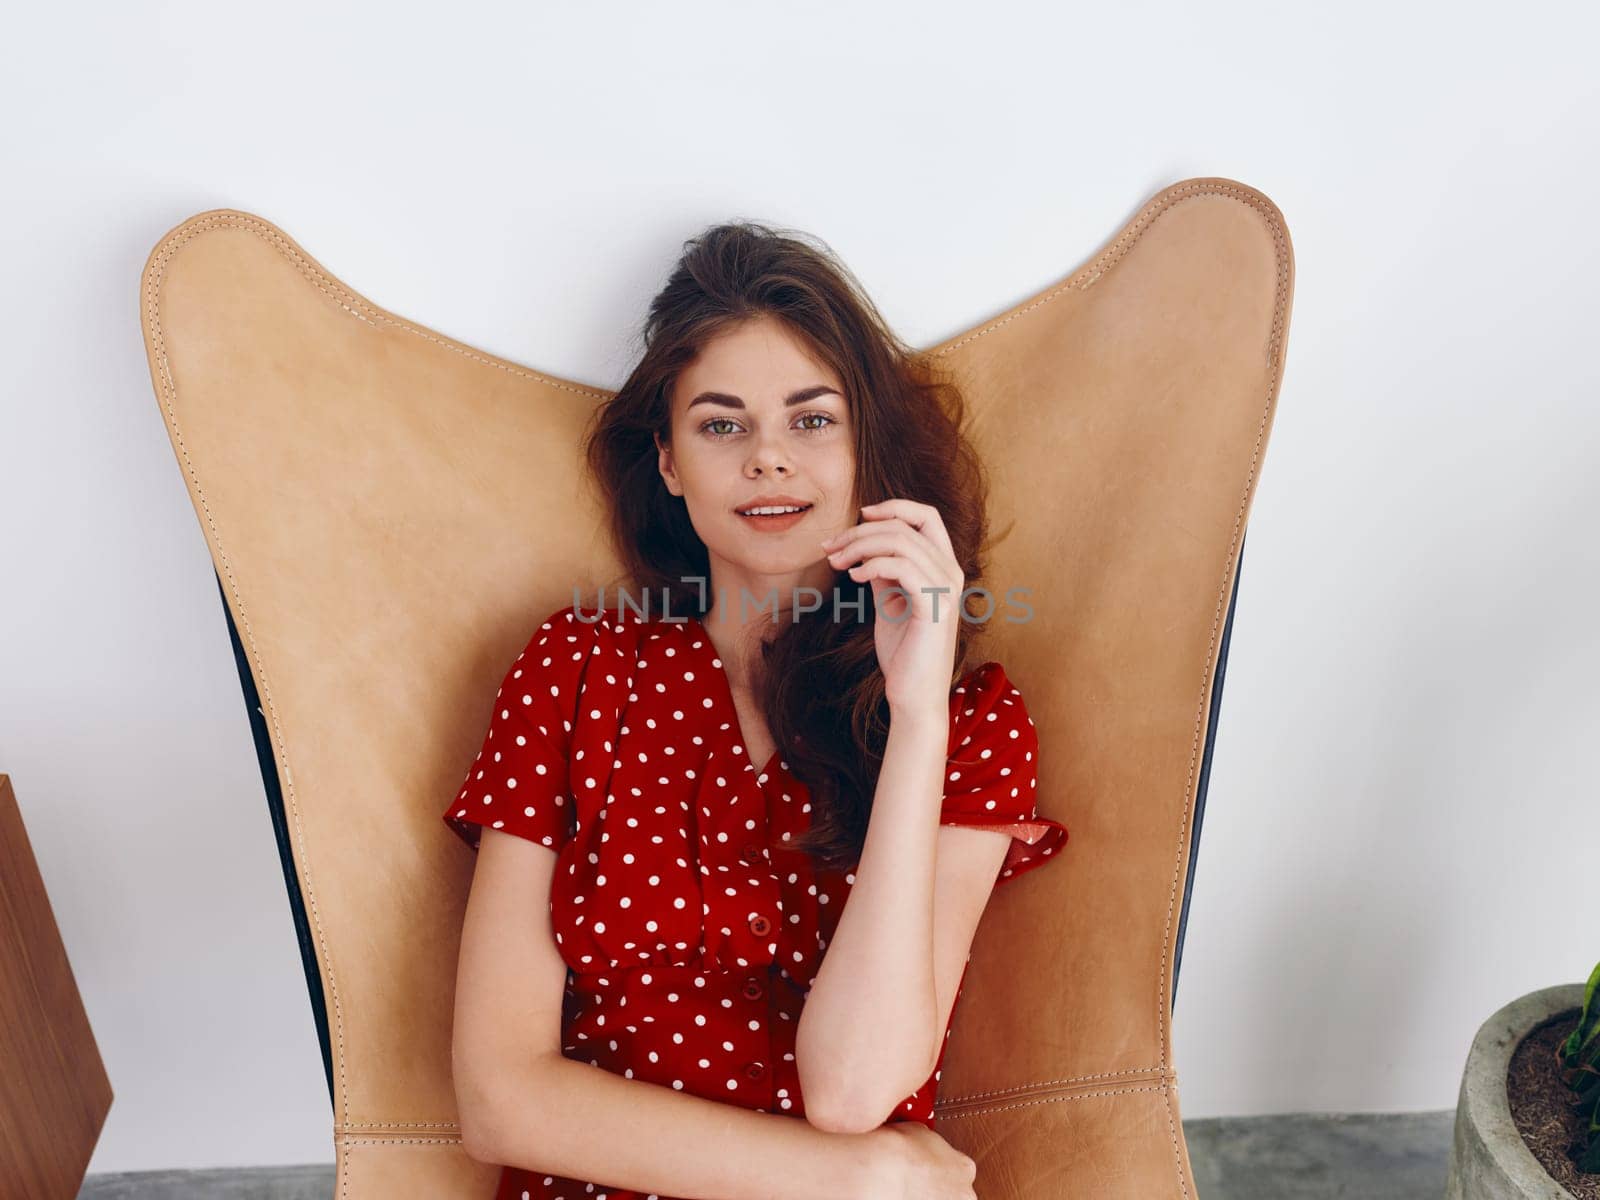 Woman sitting in leather armchair smile with teeth Lifestyle red polka dot dress, relaxing at home stylish modern interior with white walls. High quality photo